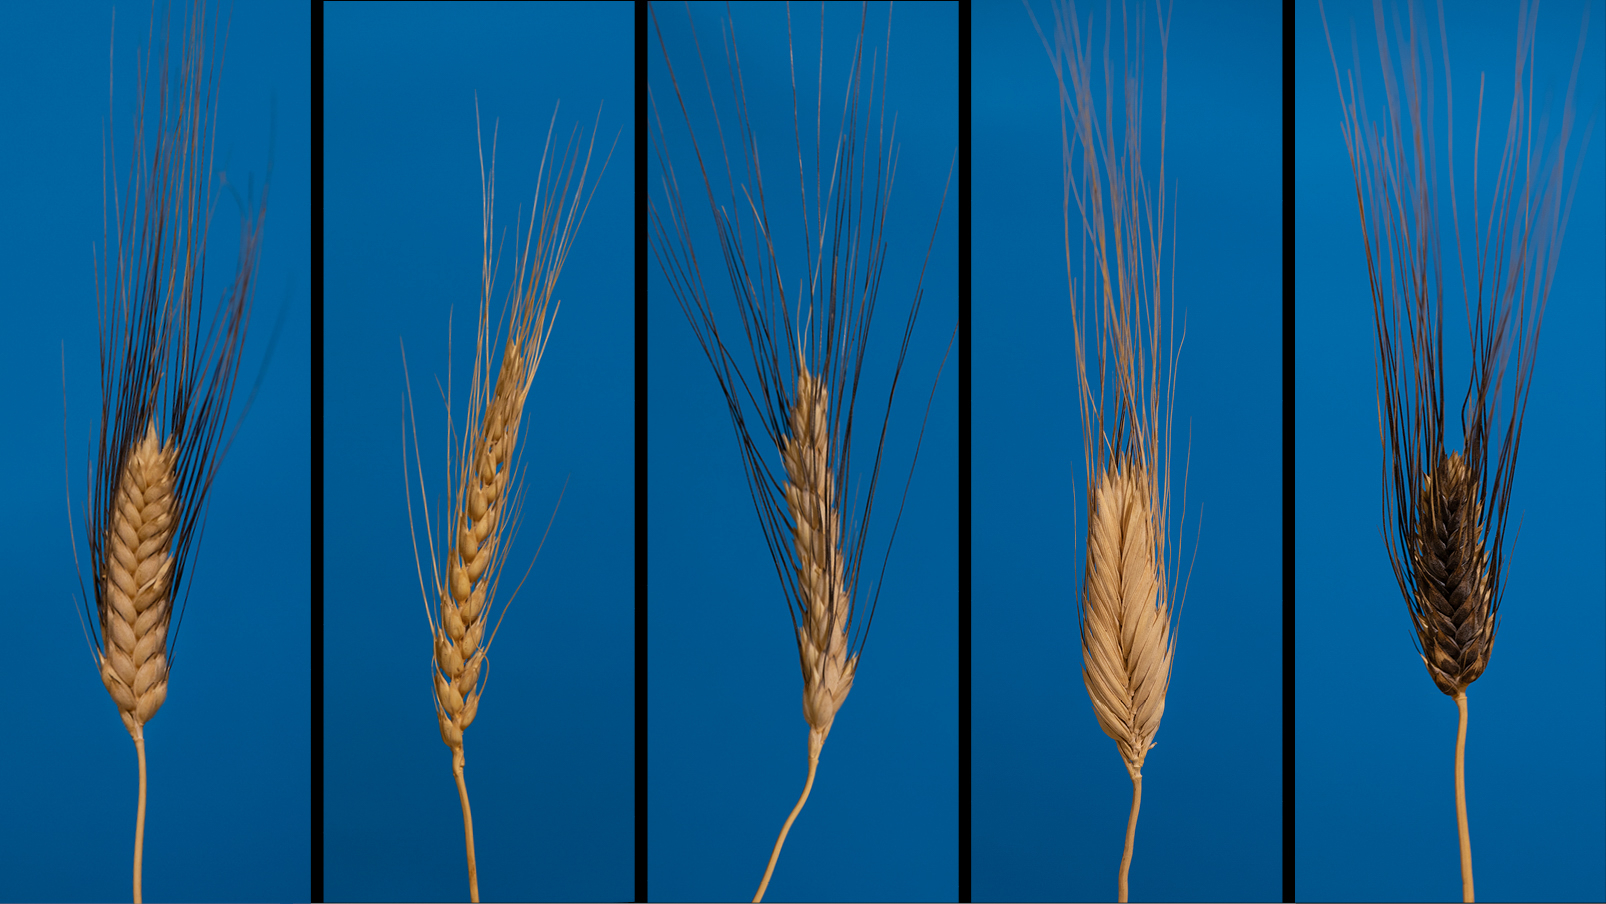 A collage of different heads of heirloom wheat varieties found in Lebanon, Palestine, and Iraq.